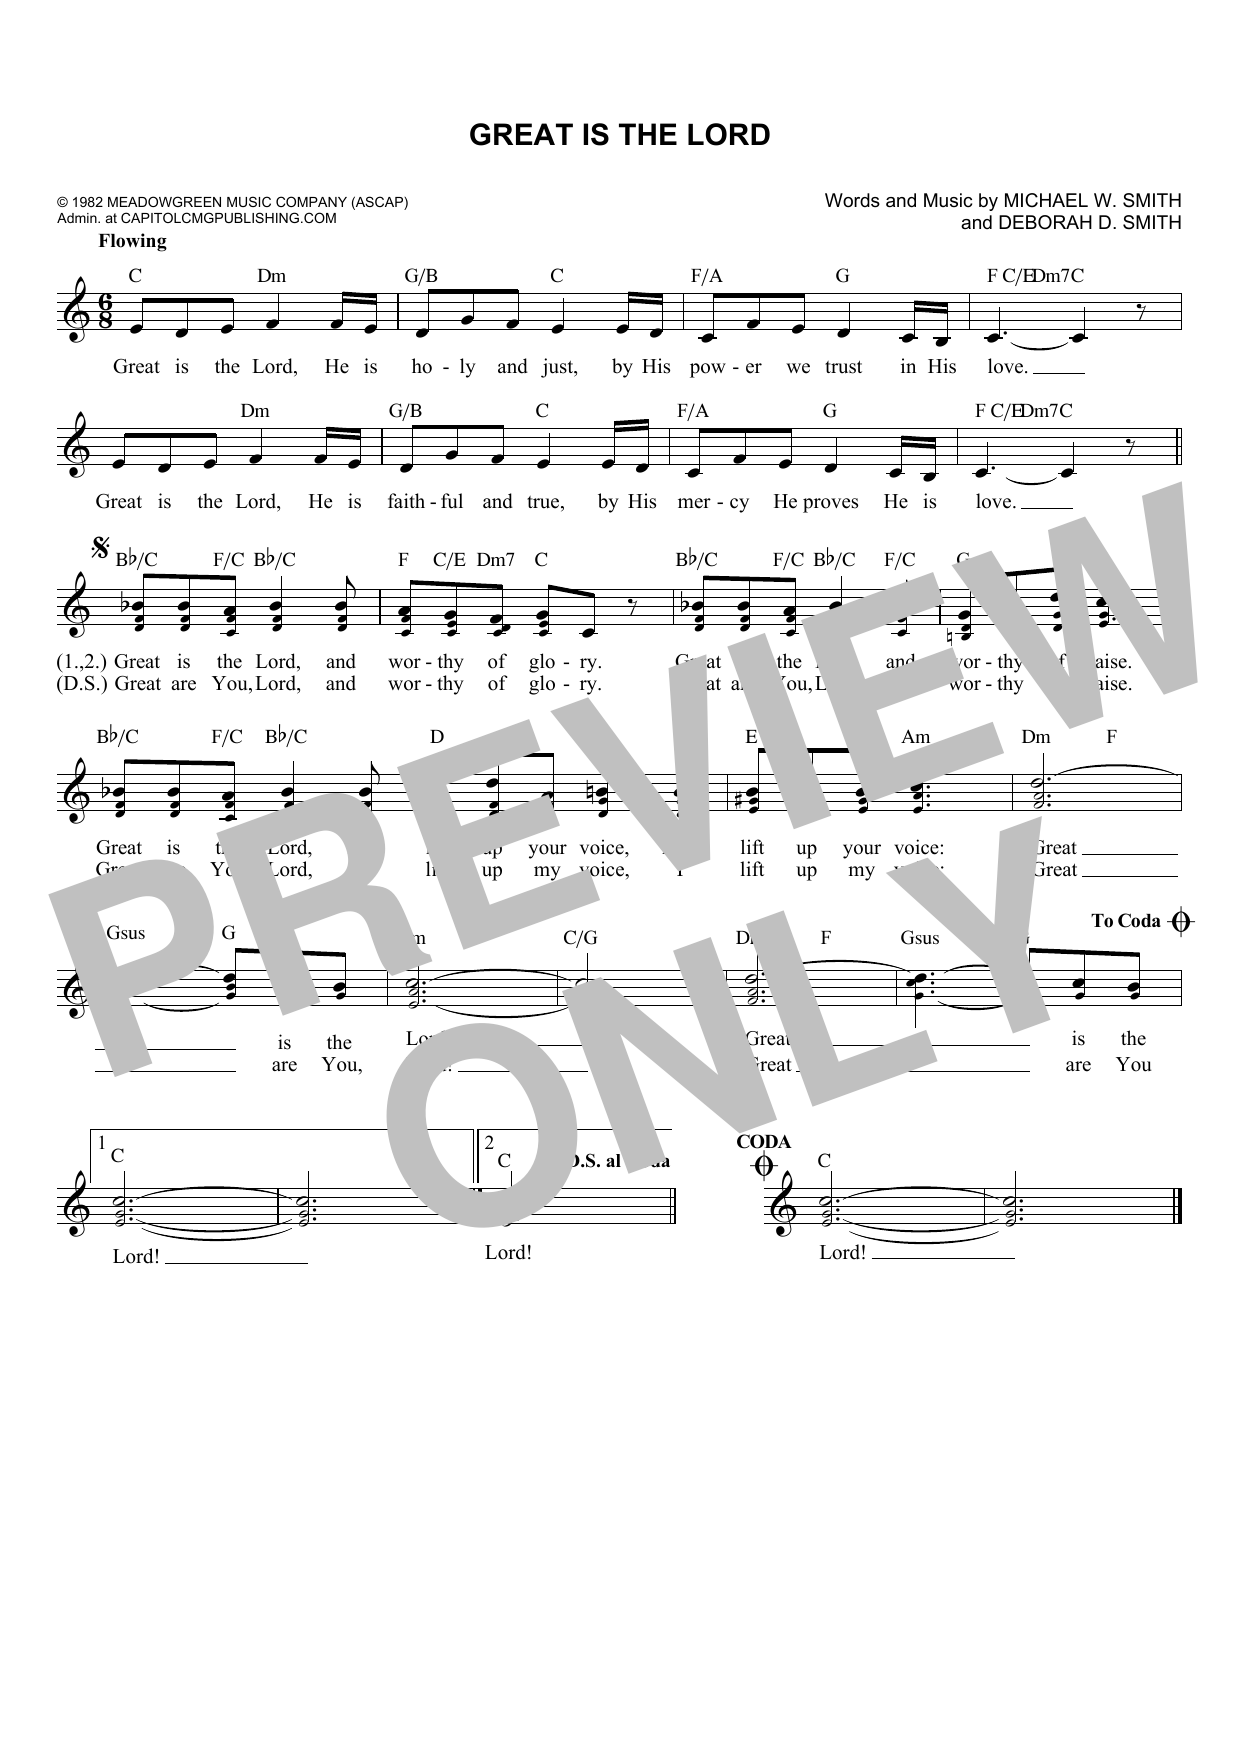 Download Michael W. Smith Great Is The Lord Sheet Music